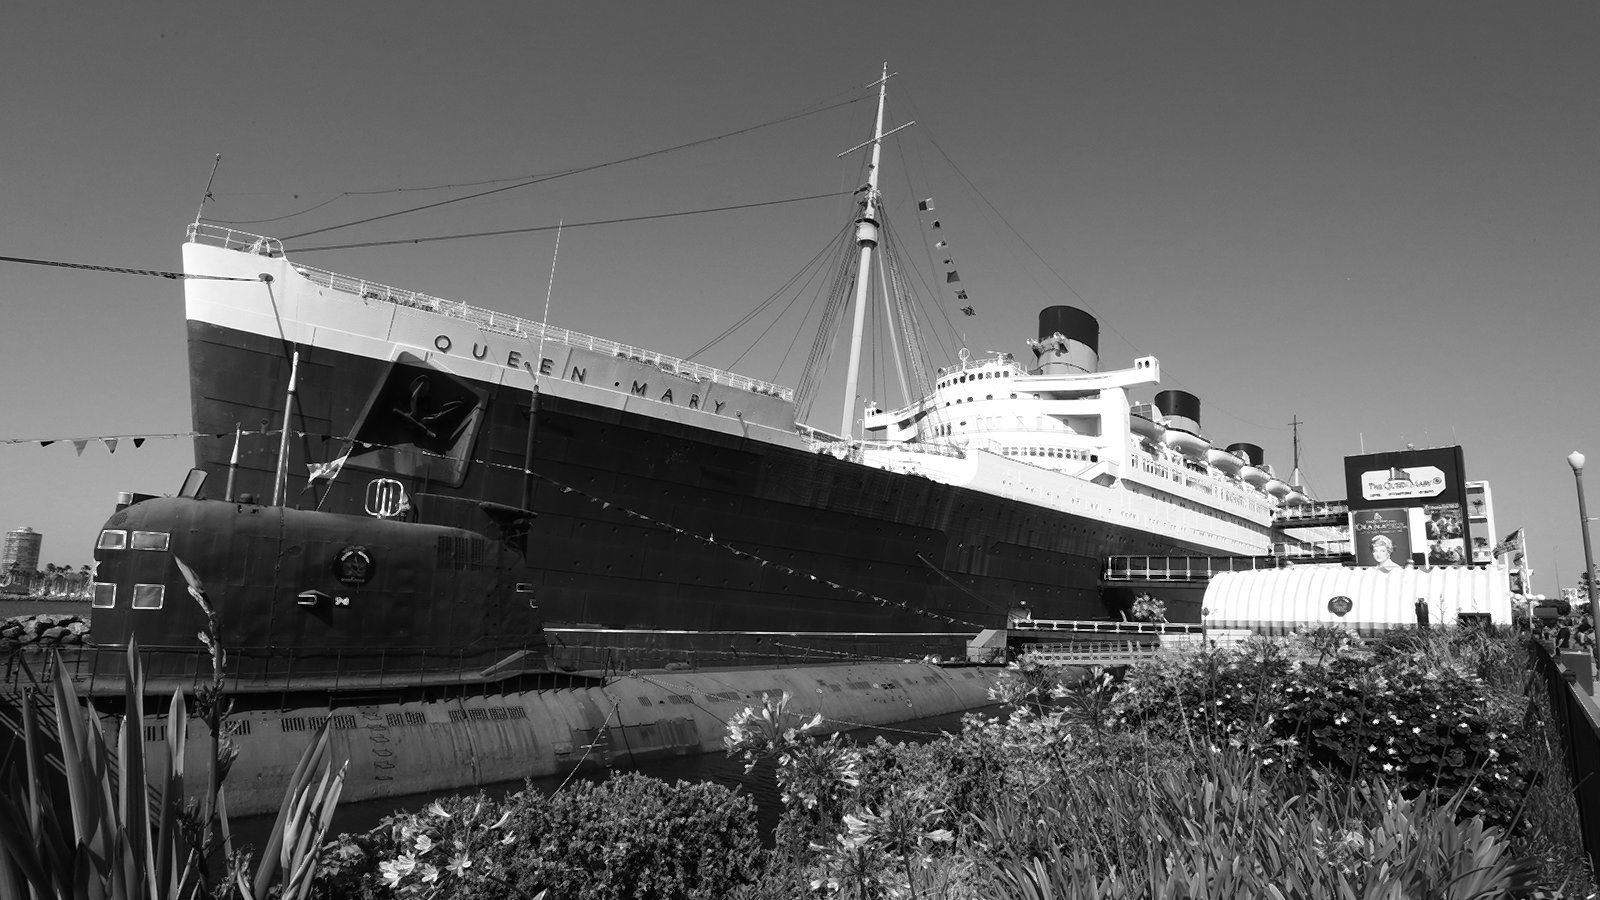 The Queen Mary And Three Other Iconic Ocean Liners. The Queen Mary